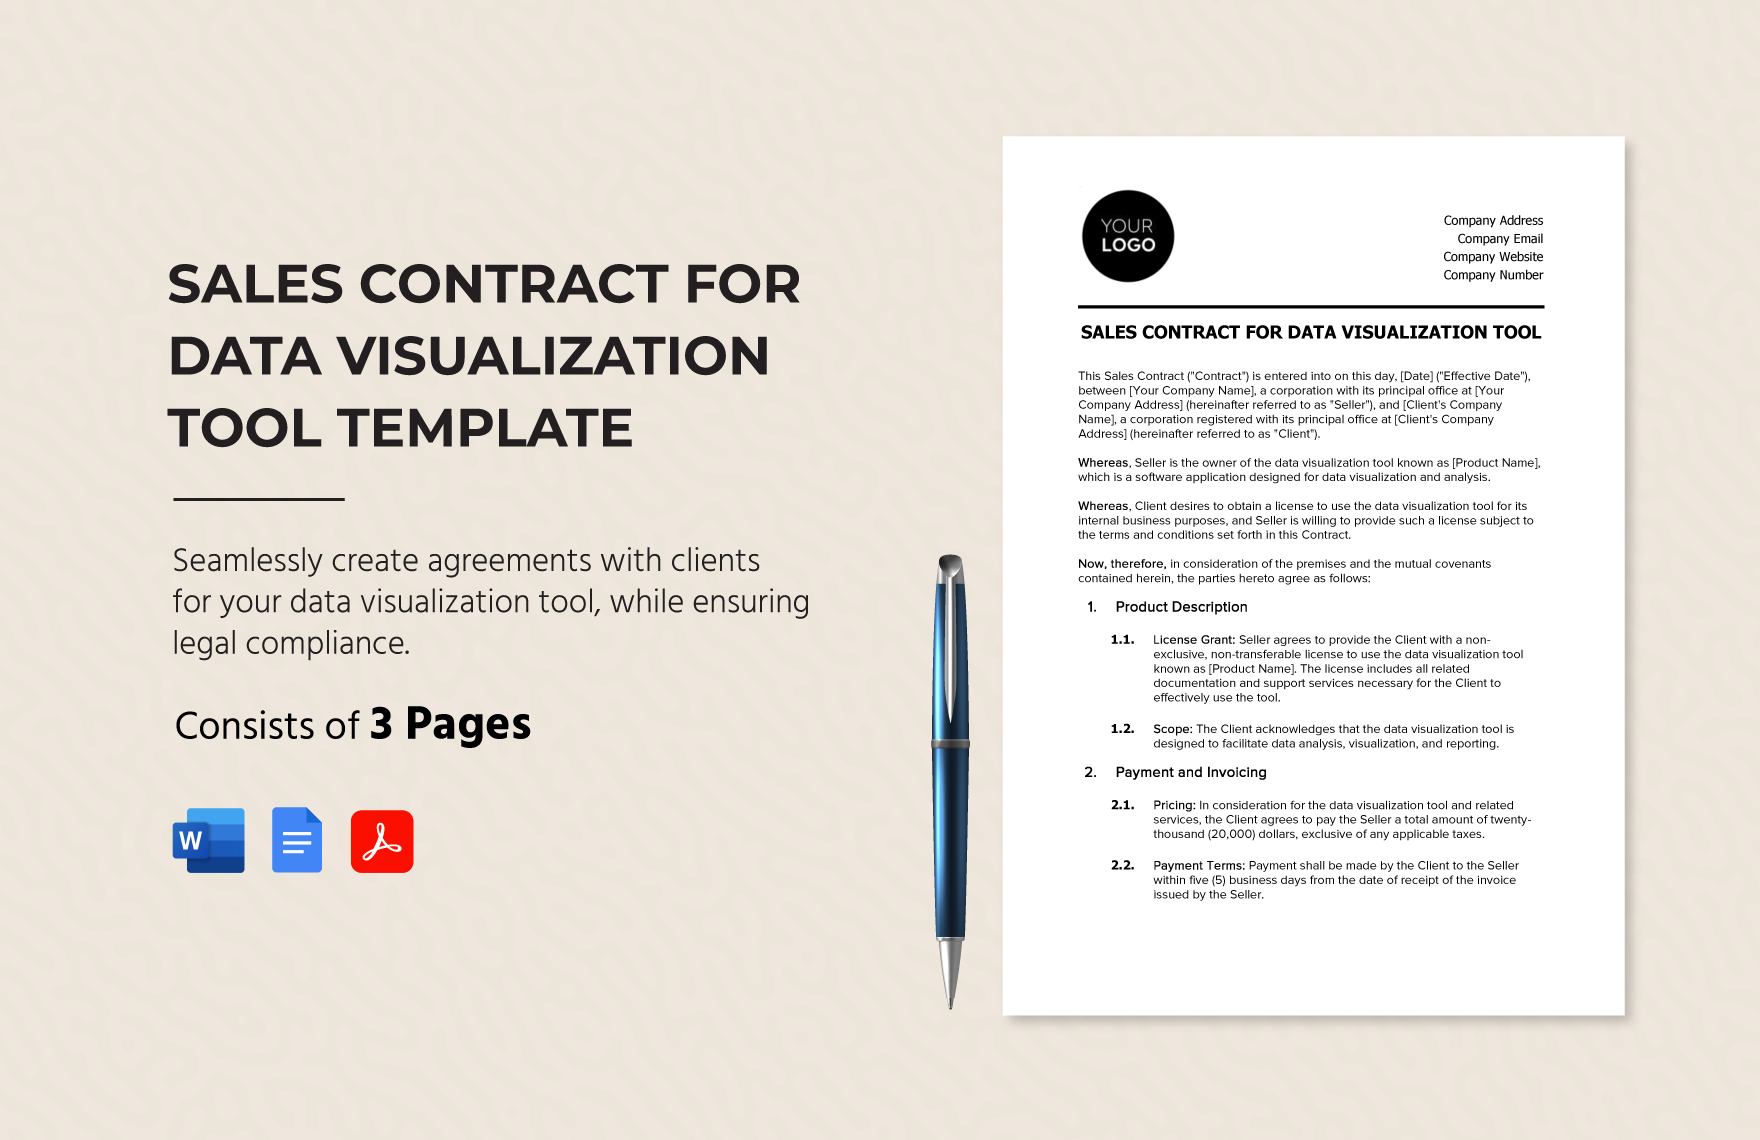 Sales Contract for Data Visualization Tool Template